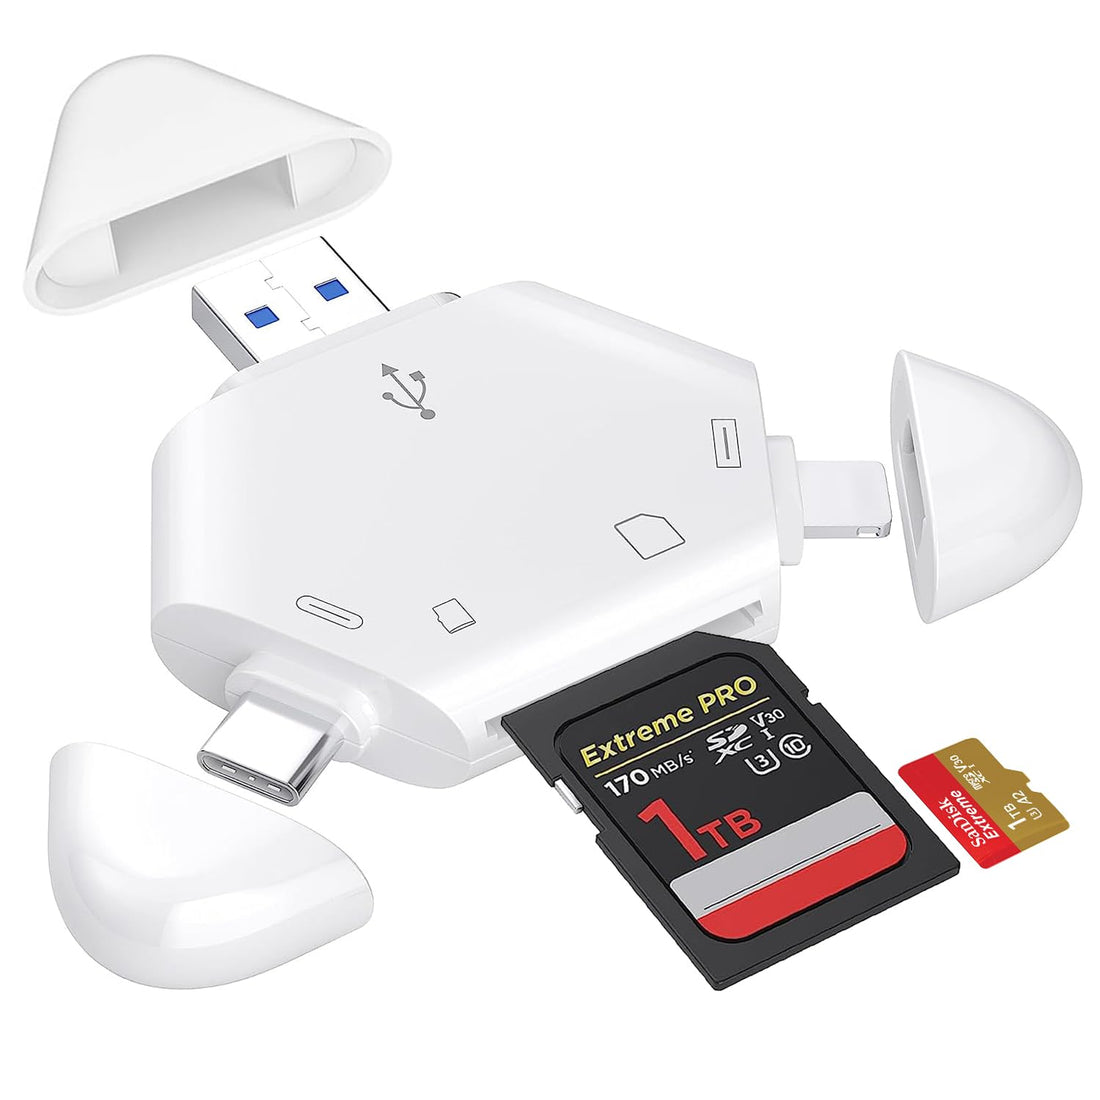 3-in-1 Portable SD Memory Card Reader : Lightning-Fast Data Transfer, Simplicity at Your Fingertips - Compact Flash Card Reader, sd Card Reader USB c - Micro sd Card Reader - Card Reader